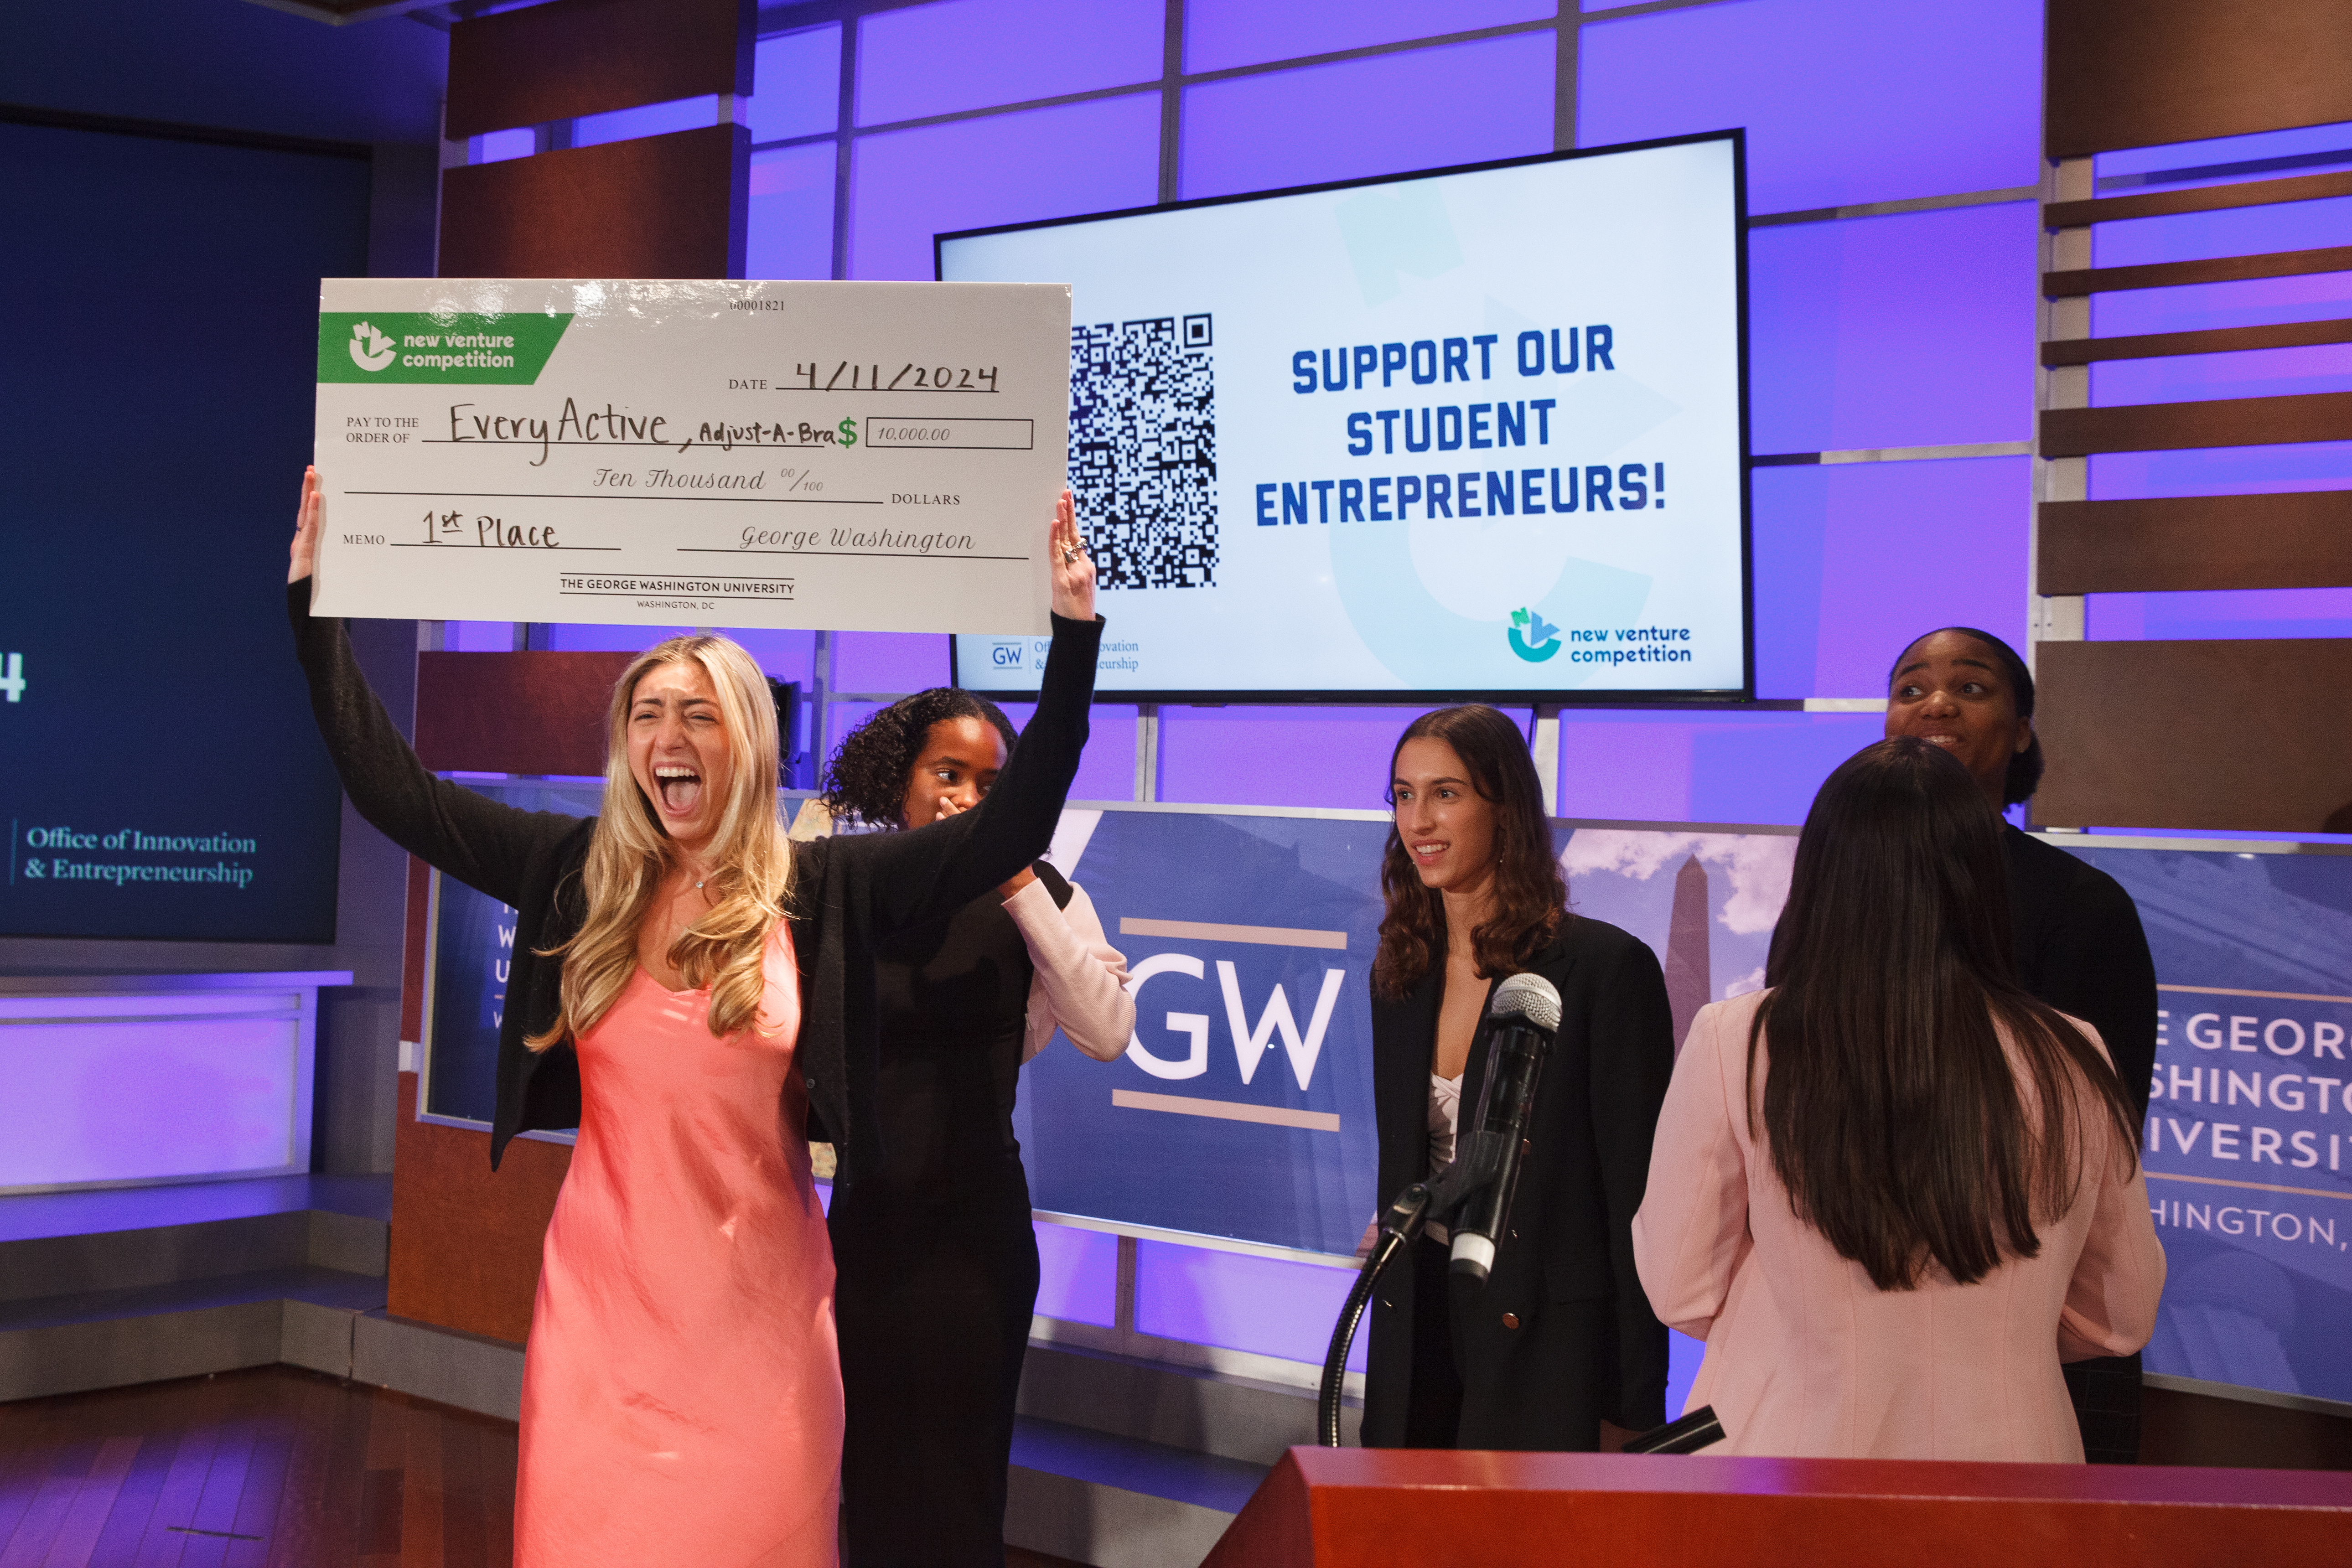 GW Business junior Camryn Baum celebrates with a first-place check after she and her team won the Consumer Goods and Services Track at Thursday's 16th annual New Venture Competition. (Photos by Rick Reinhard/For GW Today)